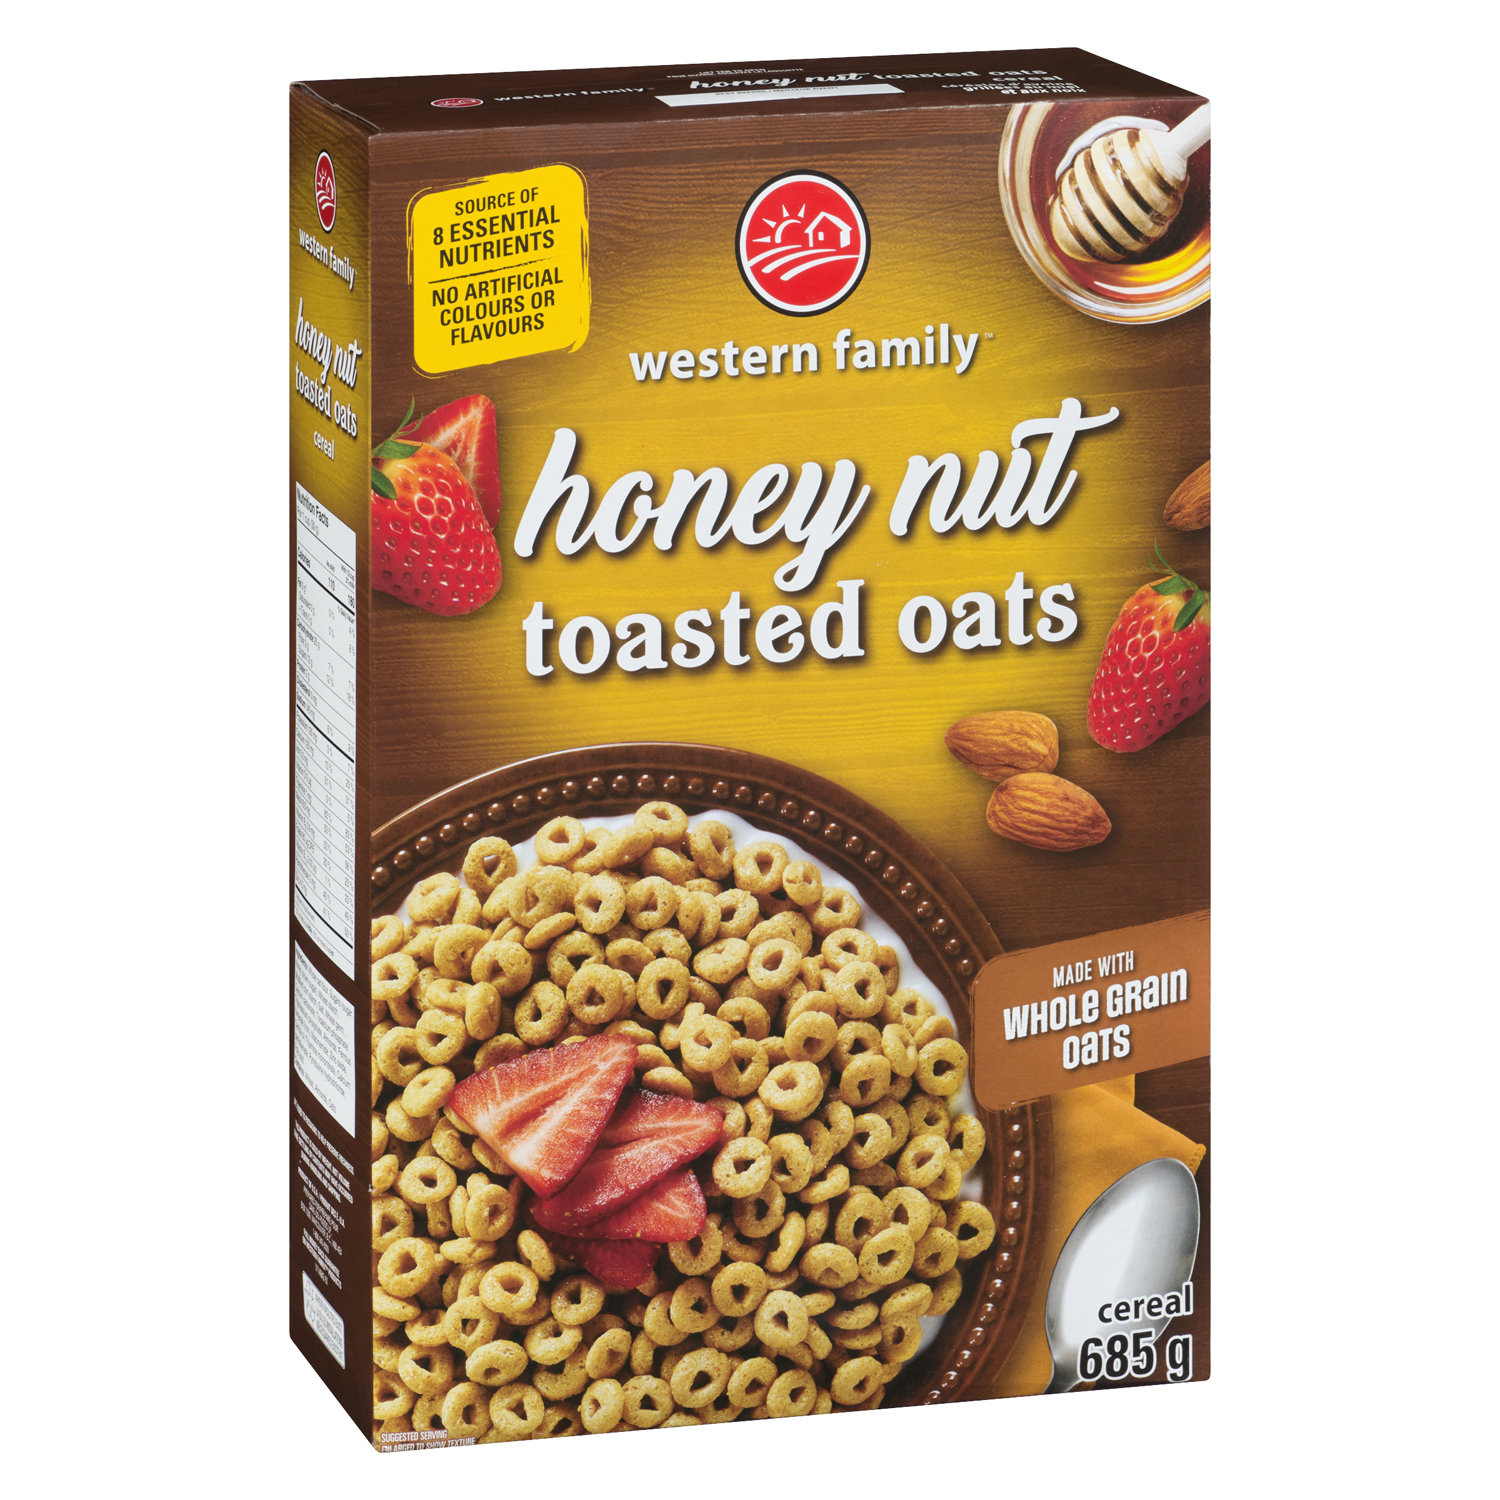 General Mills - Honey Nut Cheerios Cereal - Family Size - Save-On-Foods